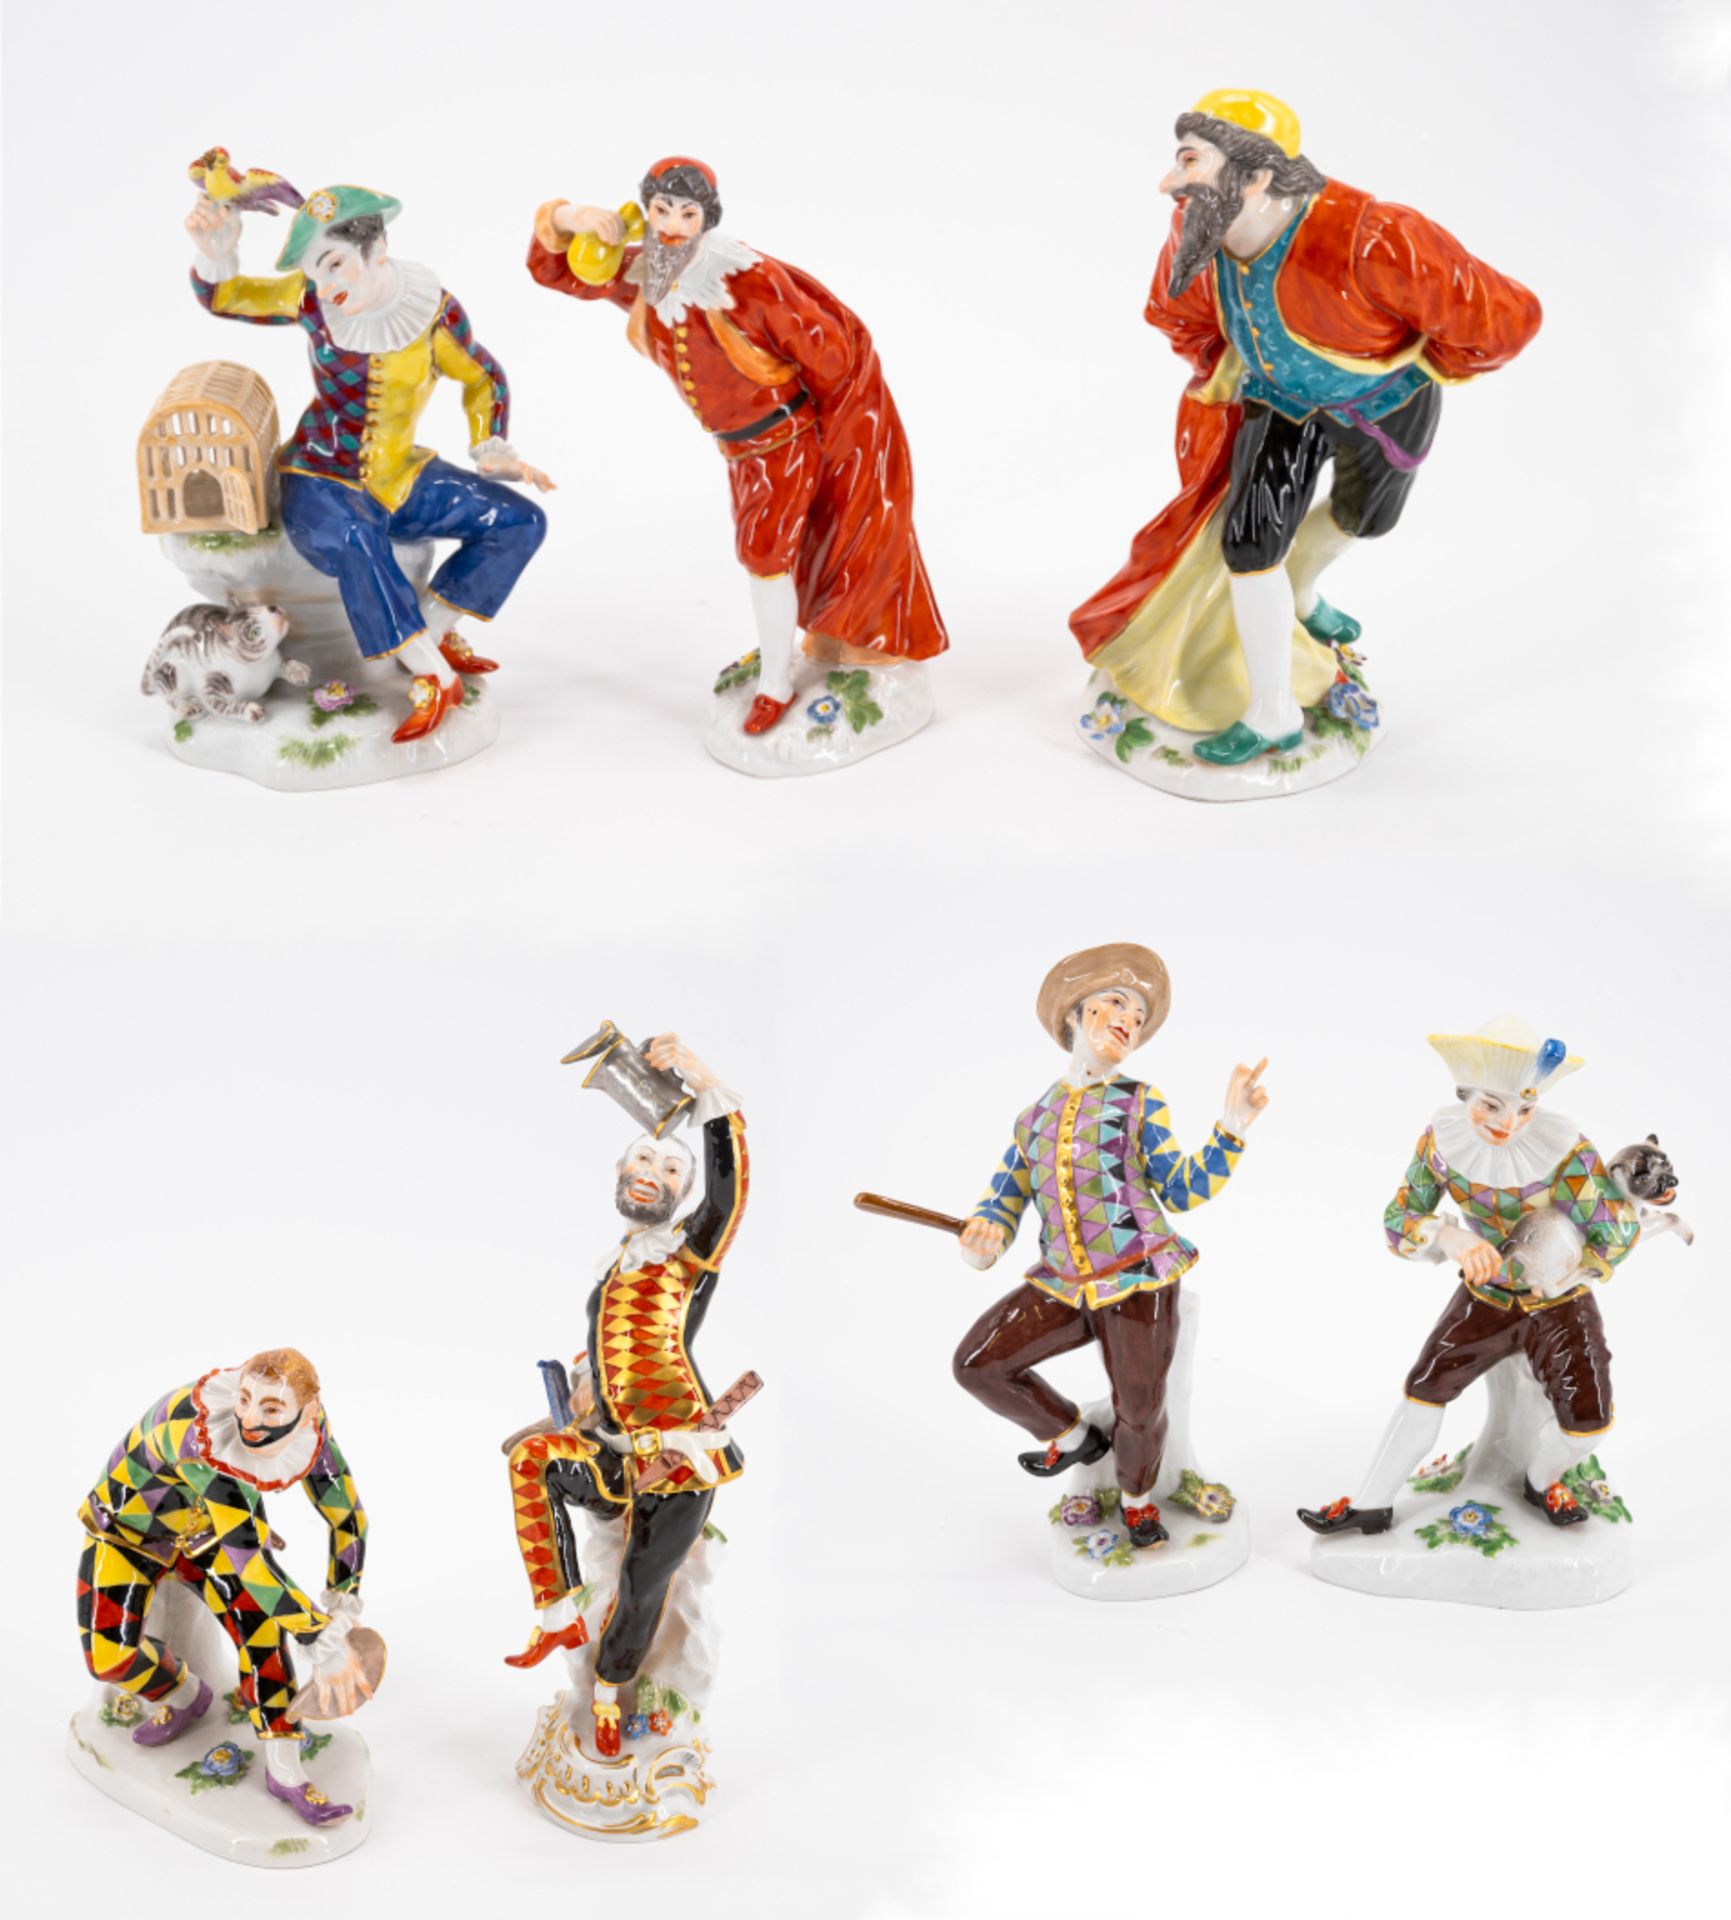 Meissen: FOUR LARGE AND THREE SMALL PORCELAIN FIGURINES FROM THE COMMEDIA DELL'ARTE